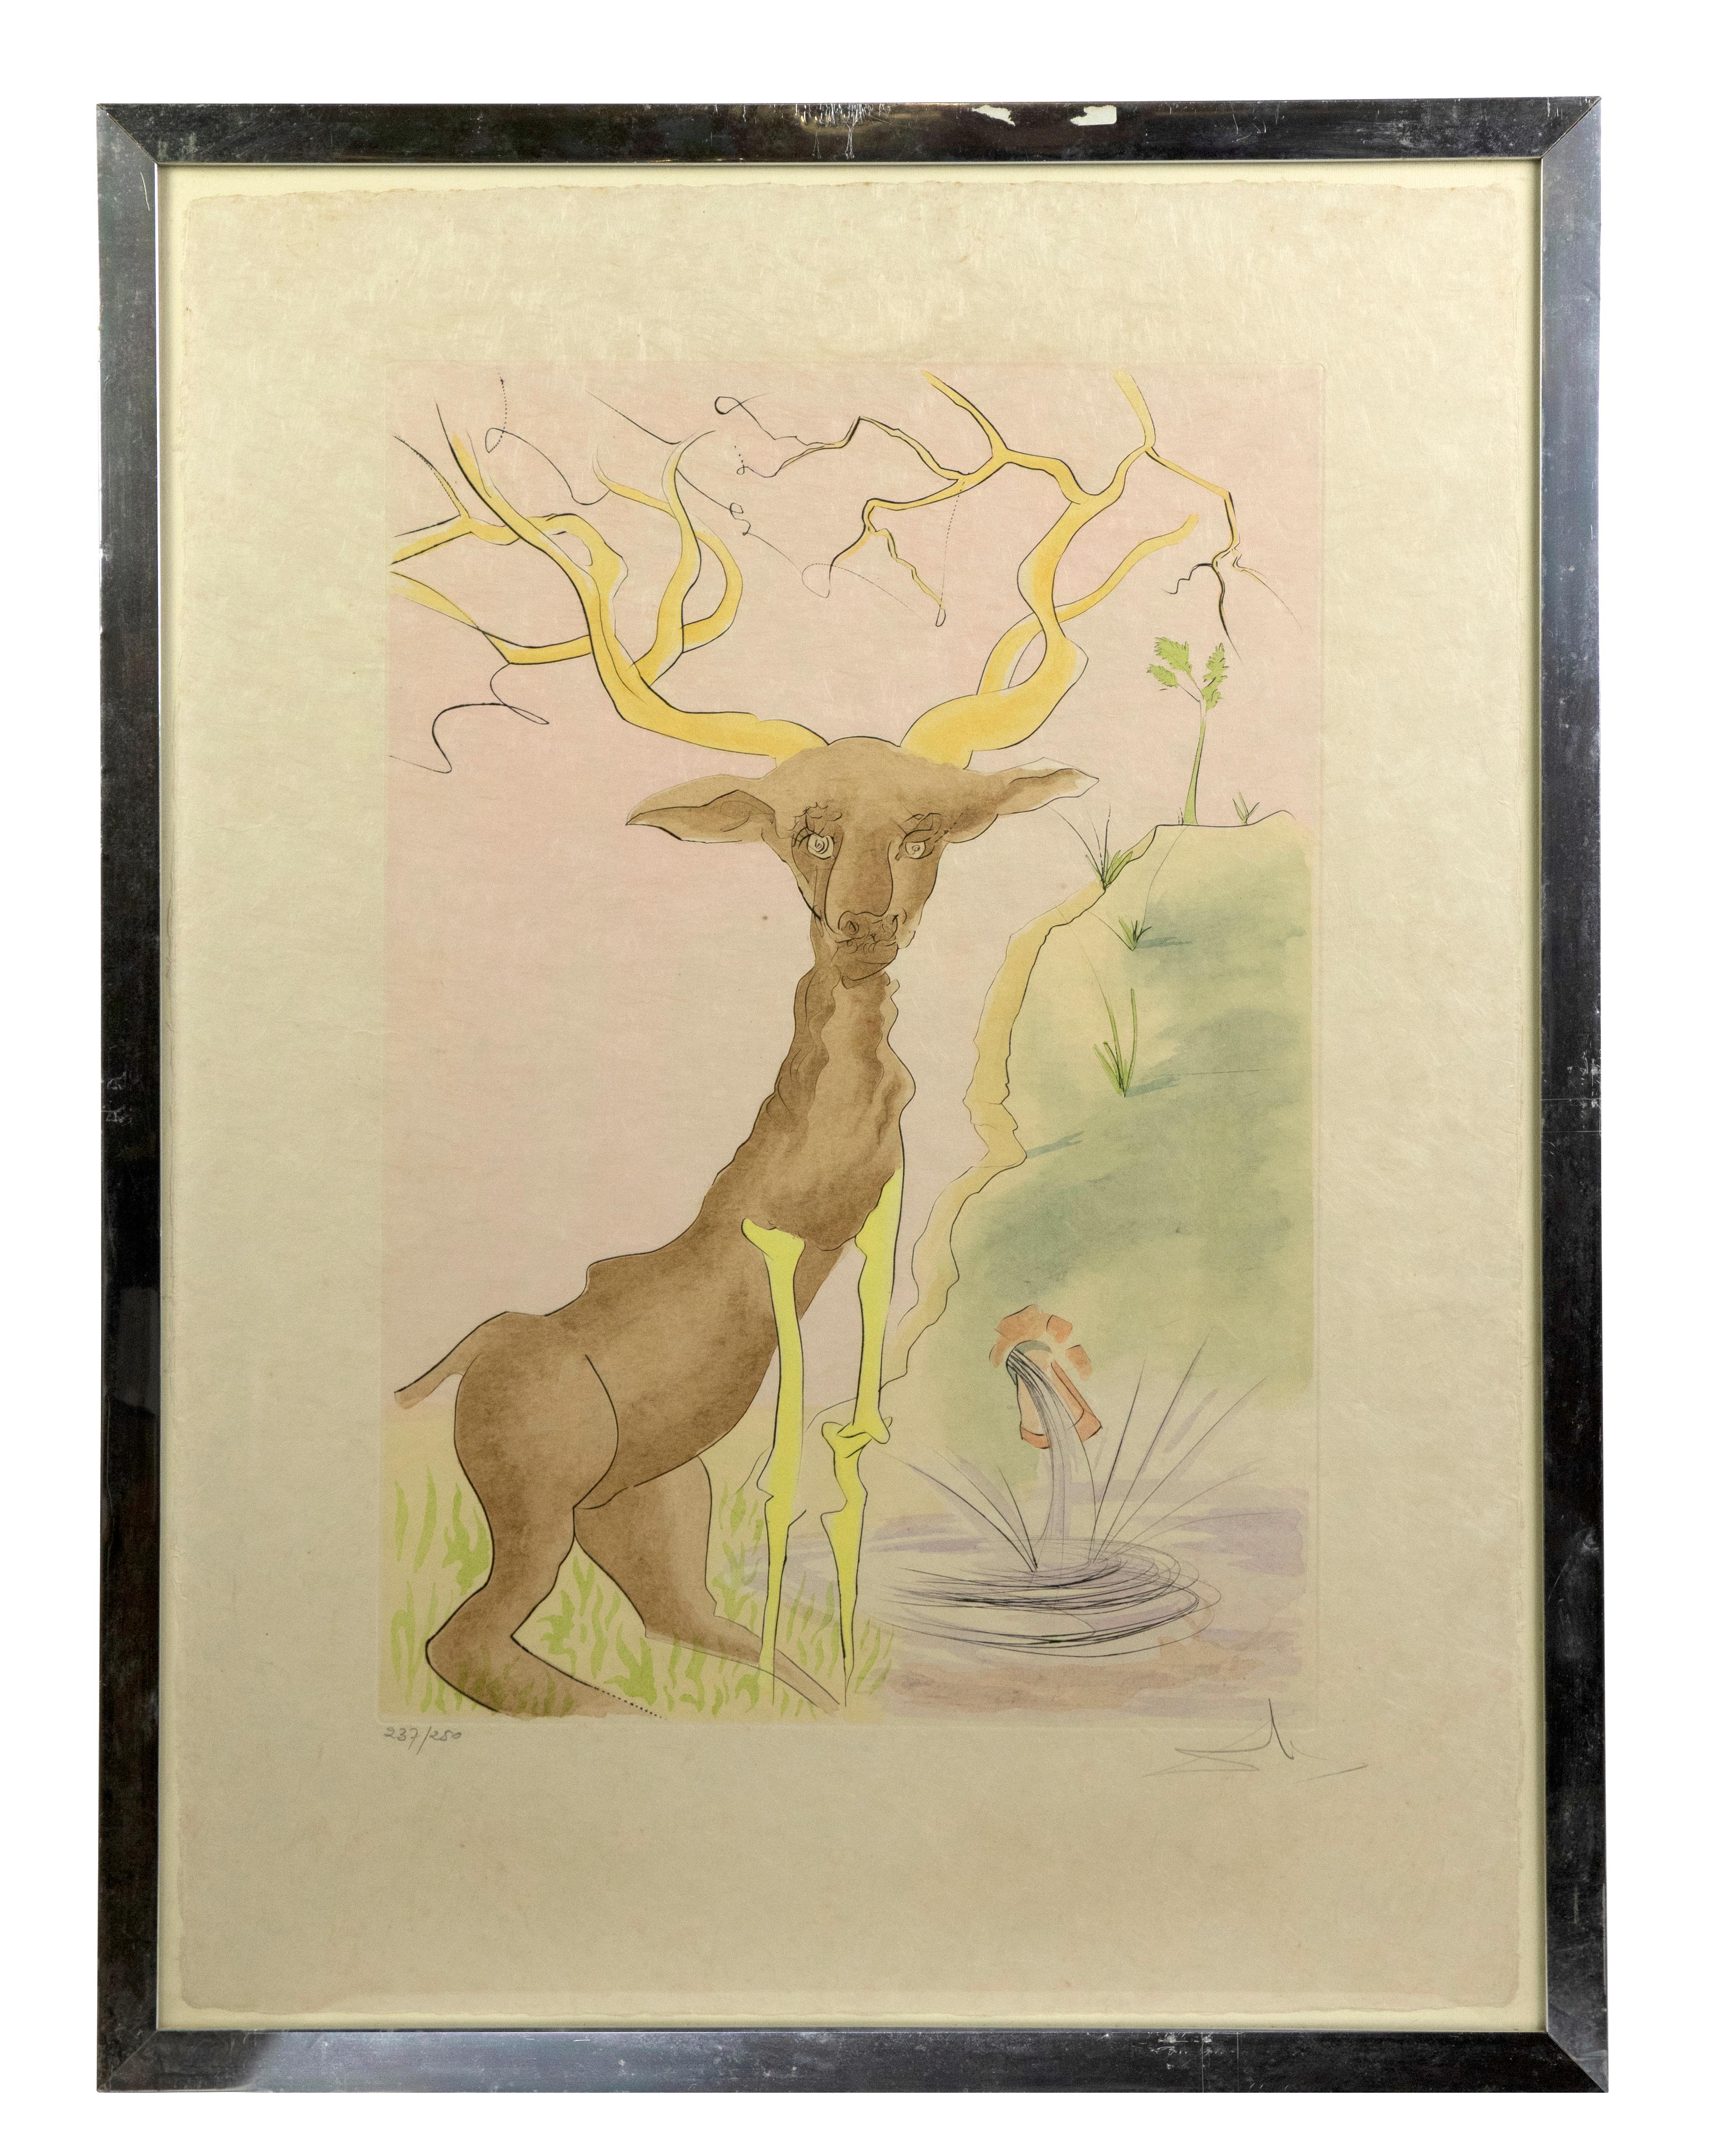 The Stag Reflected in the Water - Original Etching by S. Dali - 1974 - Print by Salvador Dalí